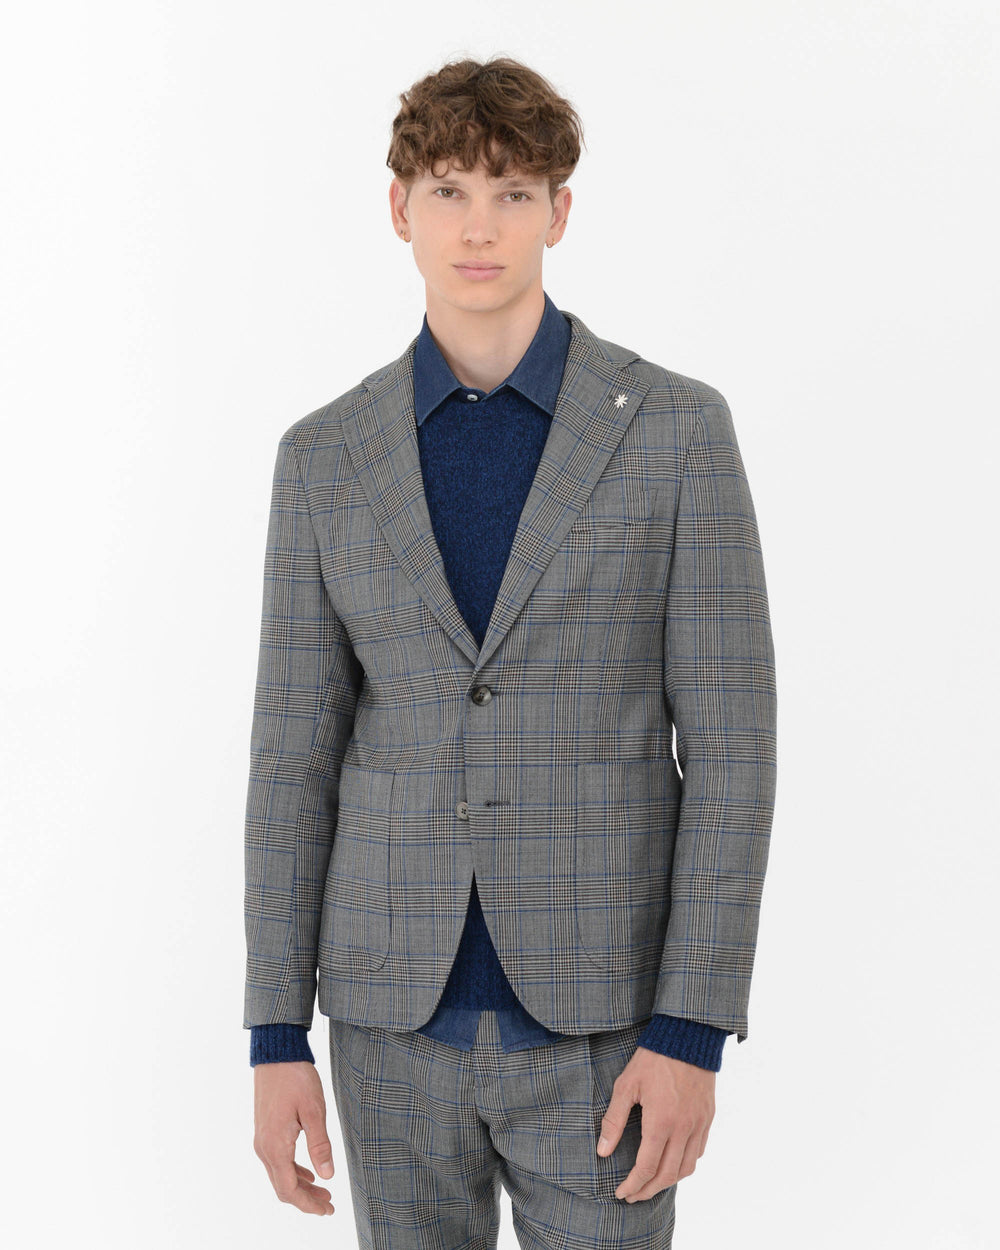 gray wales slim suit in stretch wool